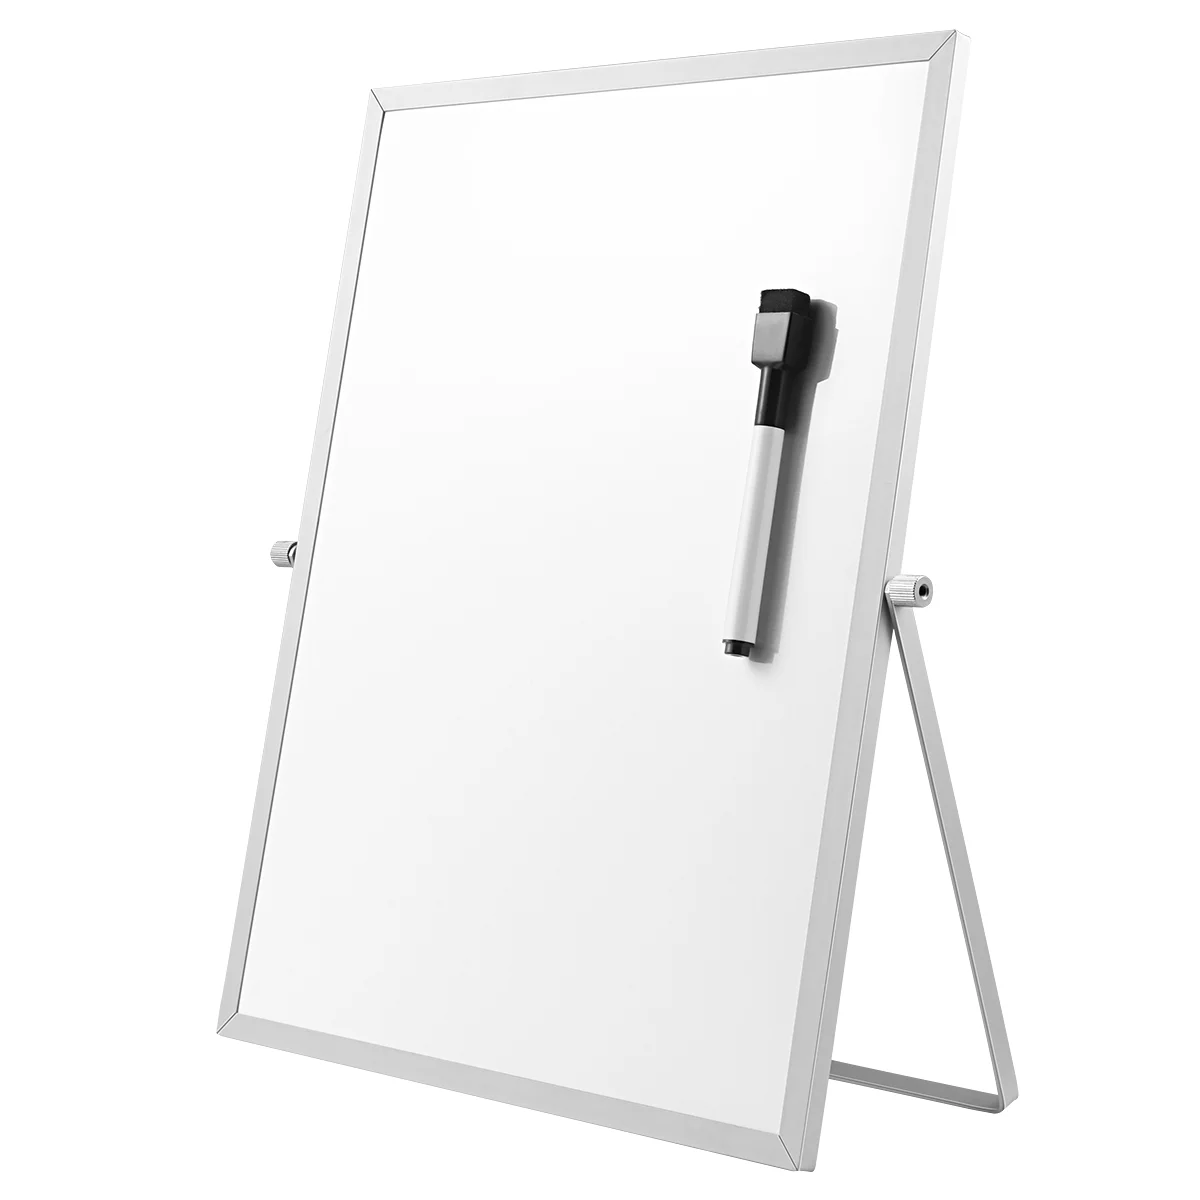 double sided white board dry erase white board erasable writing whiteboard for home office big blackboard Magnetic White Board Double Sided Desktop Dry Erase Board with Dry Erase Pen Dry Eraser Planner Reminder for School Erasable